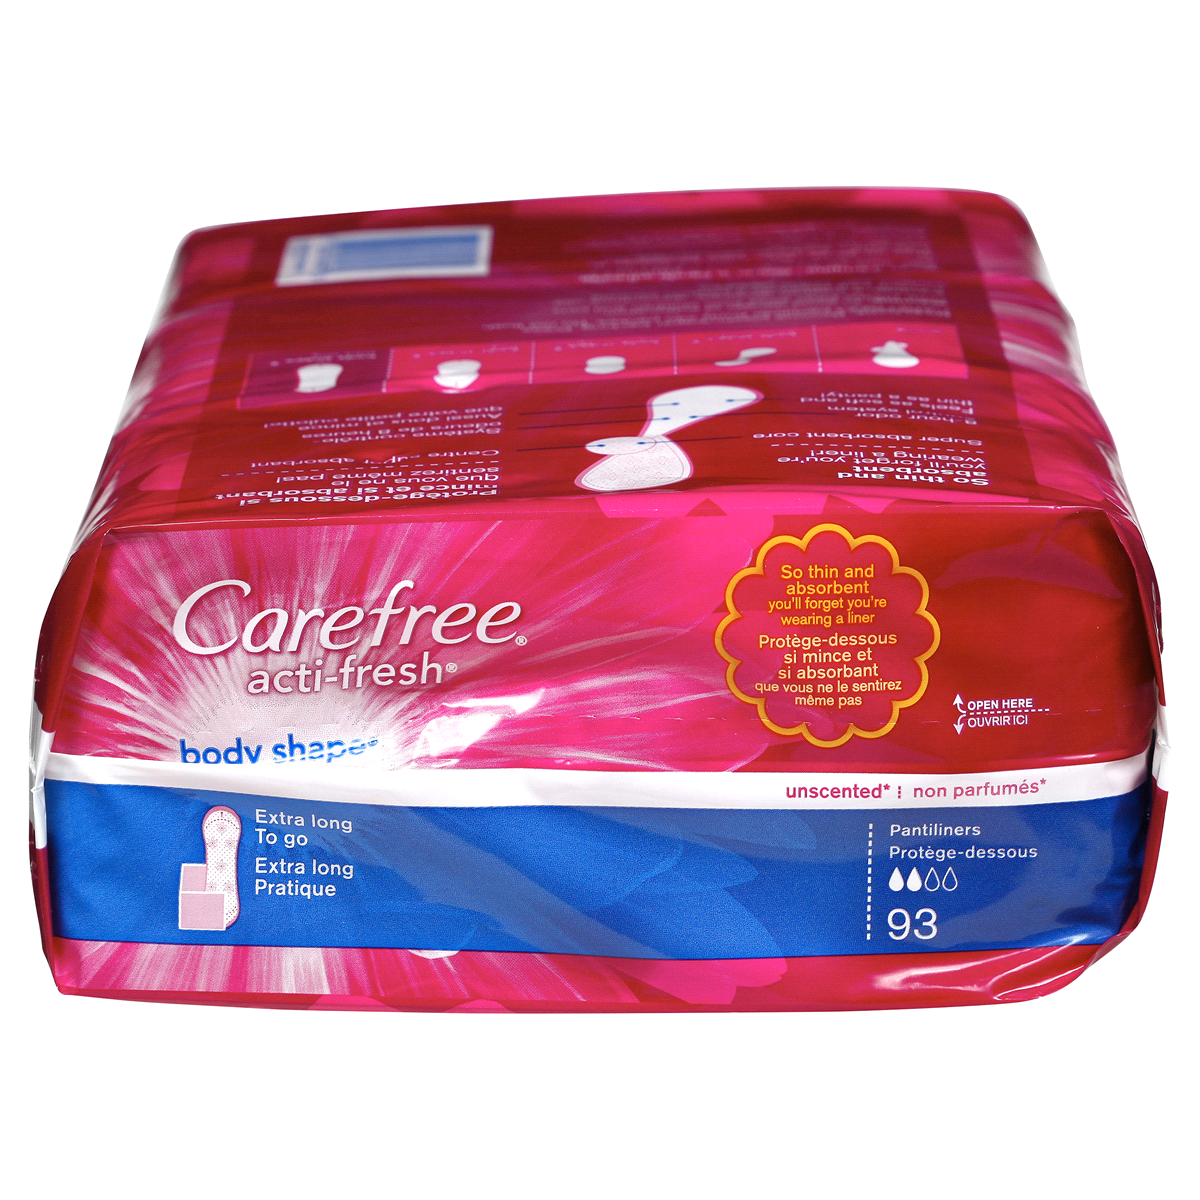 Carefree Acti-Fresh Body Shape Panty Liners Wrapped Unscented, Extra Long